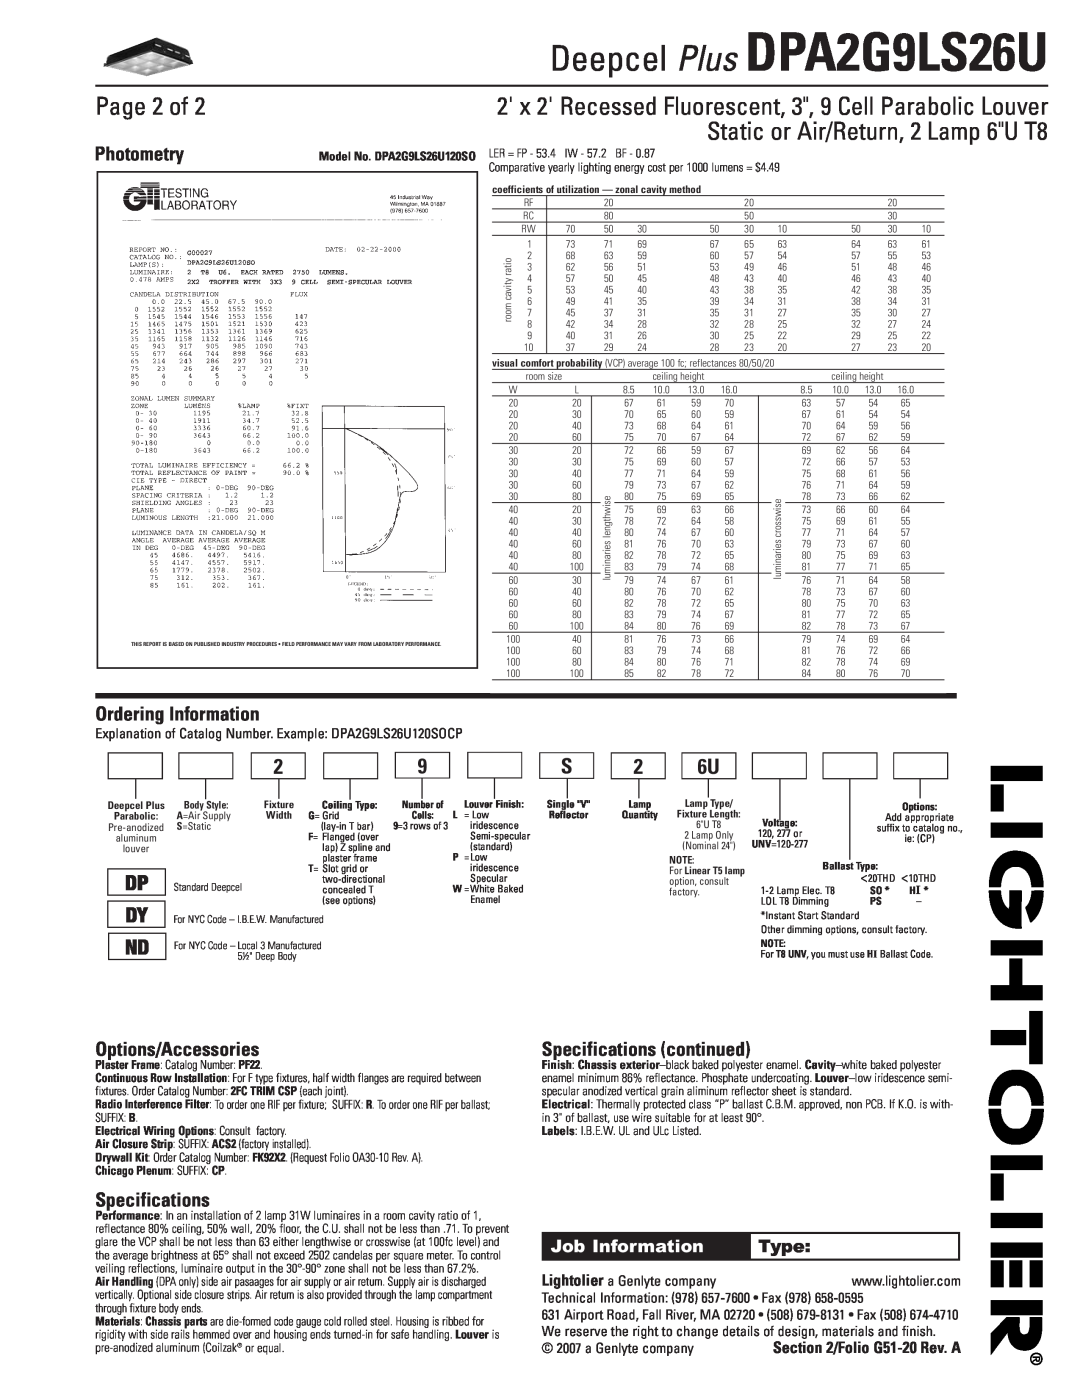 Lightolier DPA2G9LS26U Page 2 of, Photometry, Ordering Information, Options/Accessories, Specifications continued, 2 6U 